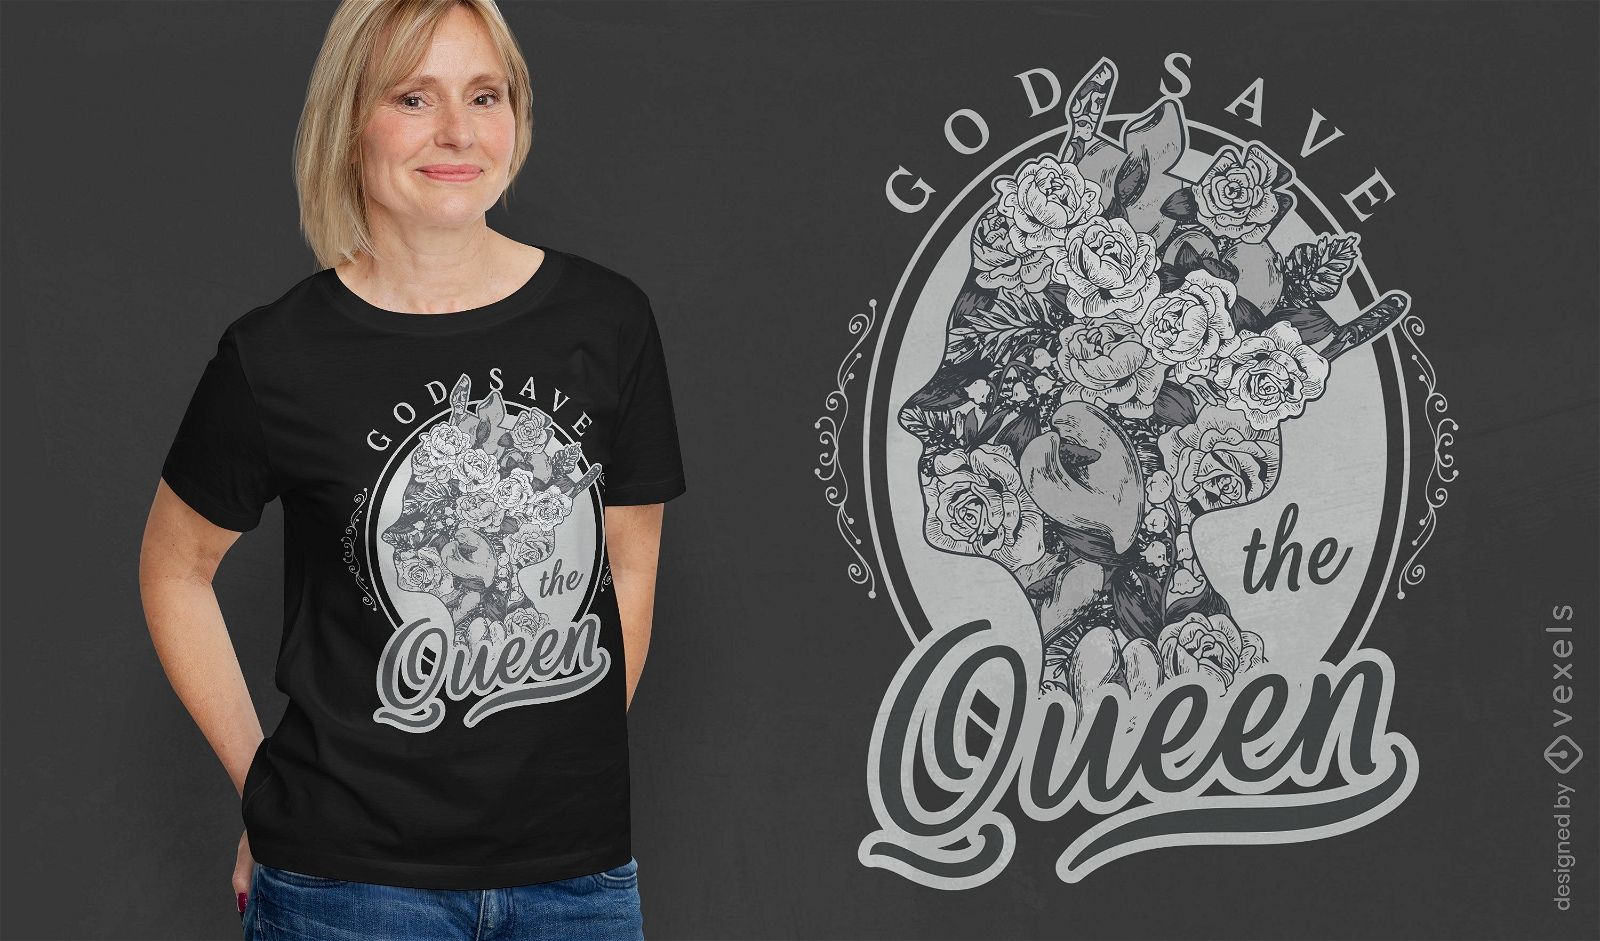 God save the queen floral t-shirt design